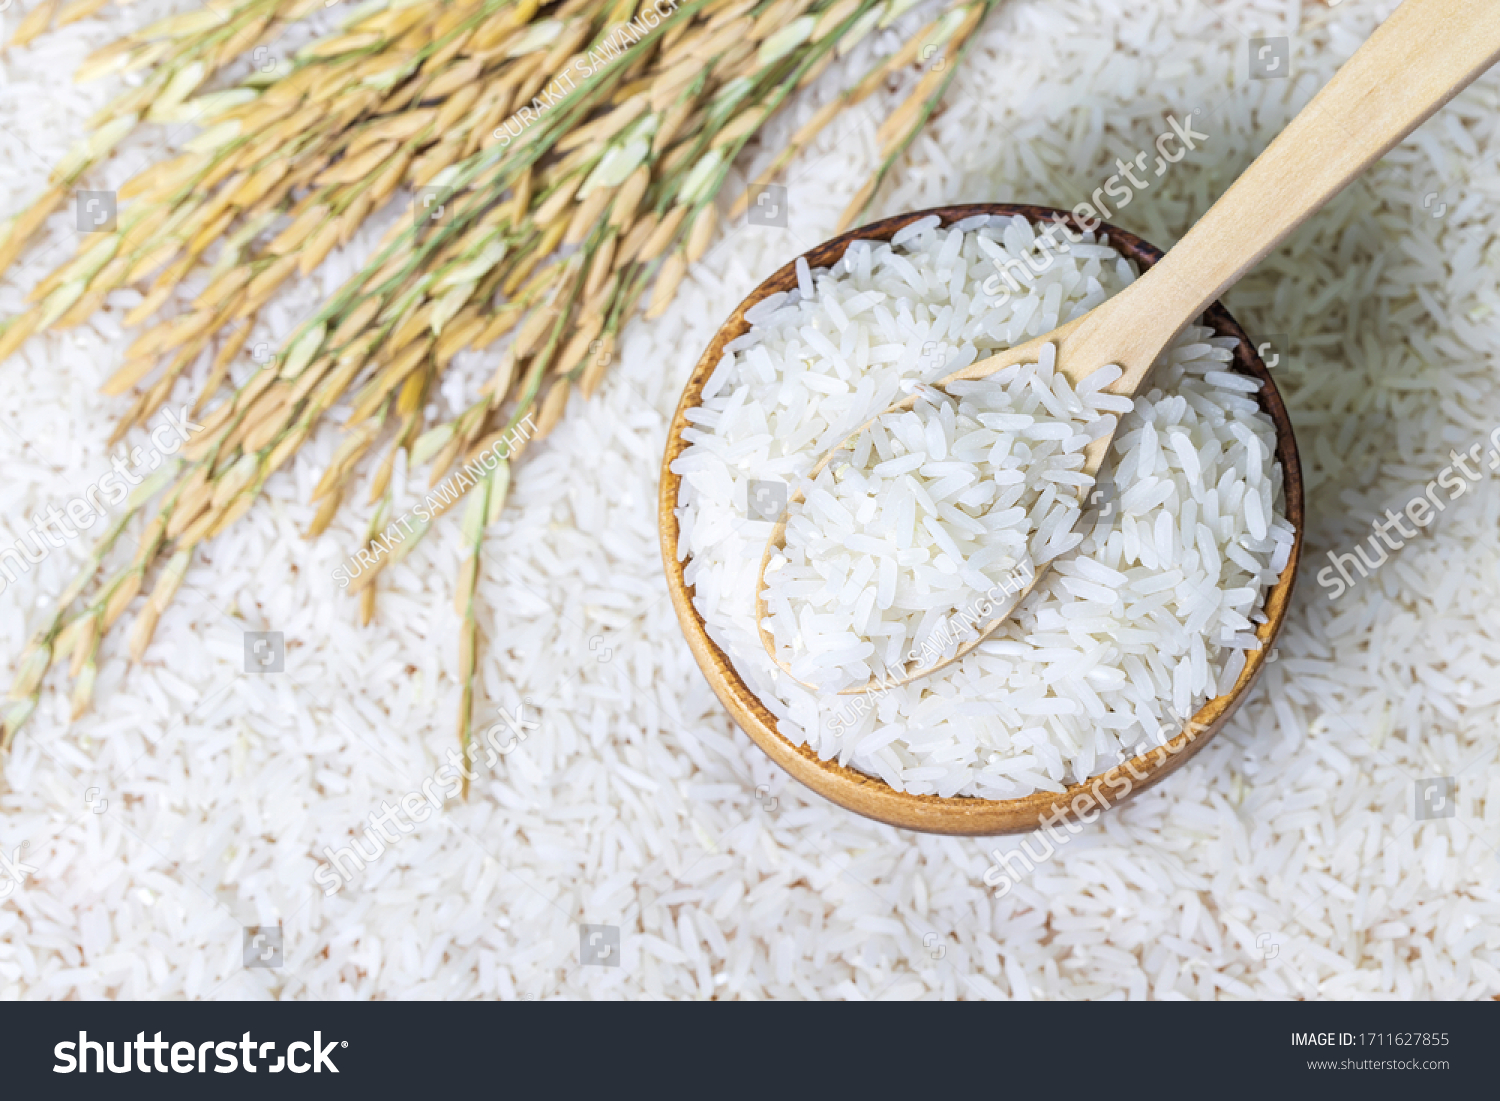 Top view of wooden spoon with rice on rice in wooden bowl on rice and rice ears background, Natural food high in protein
 #1711627855